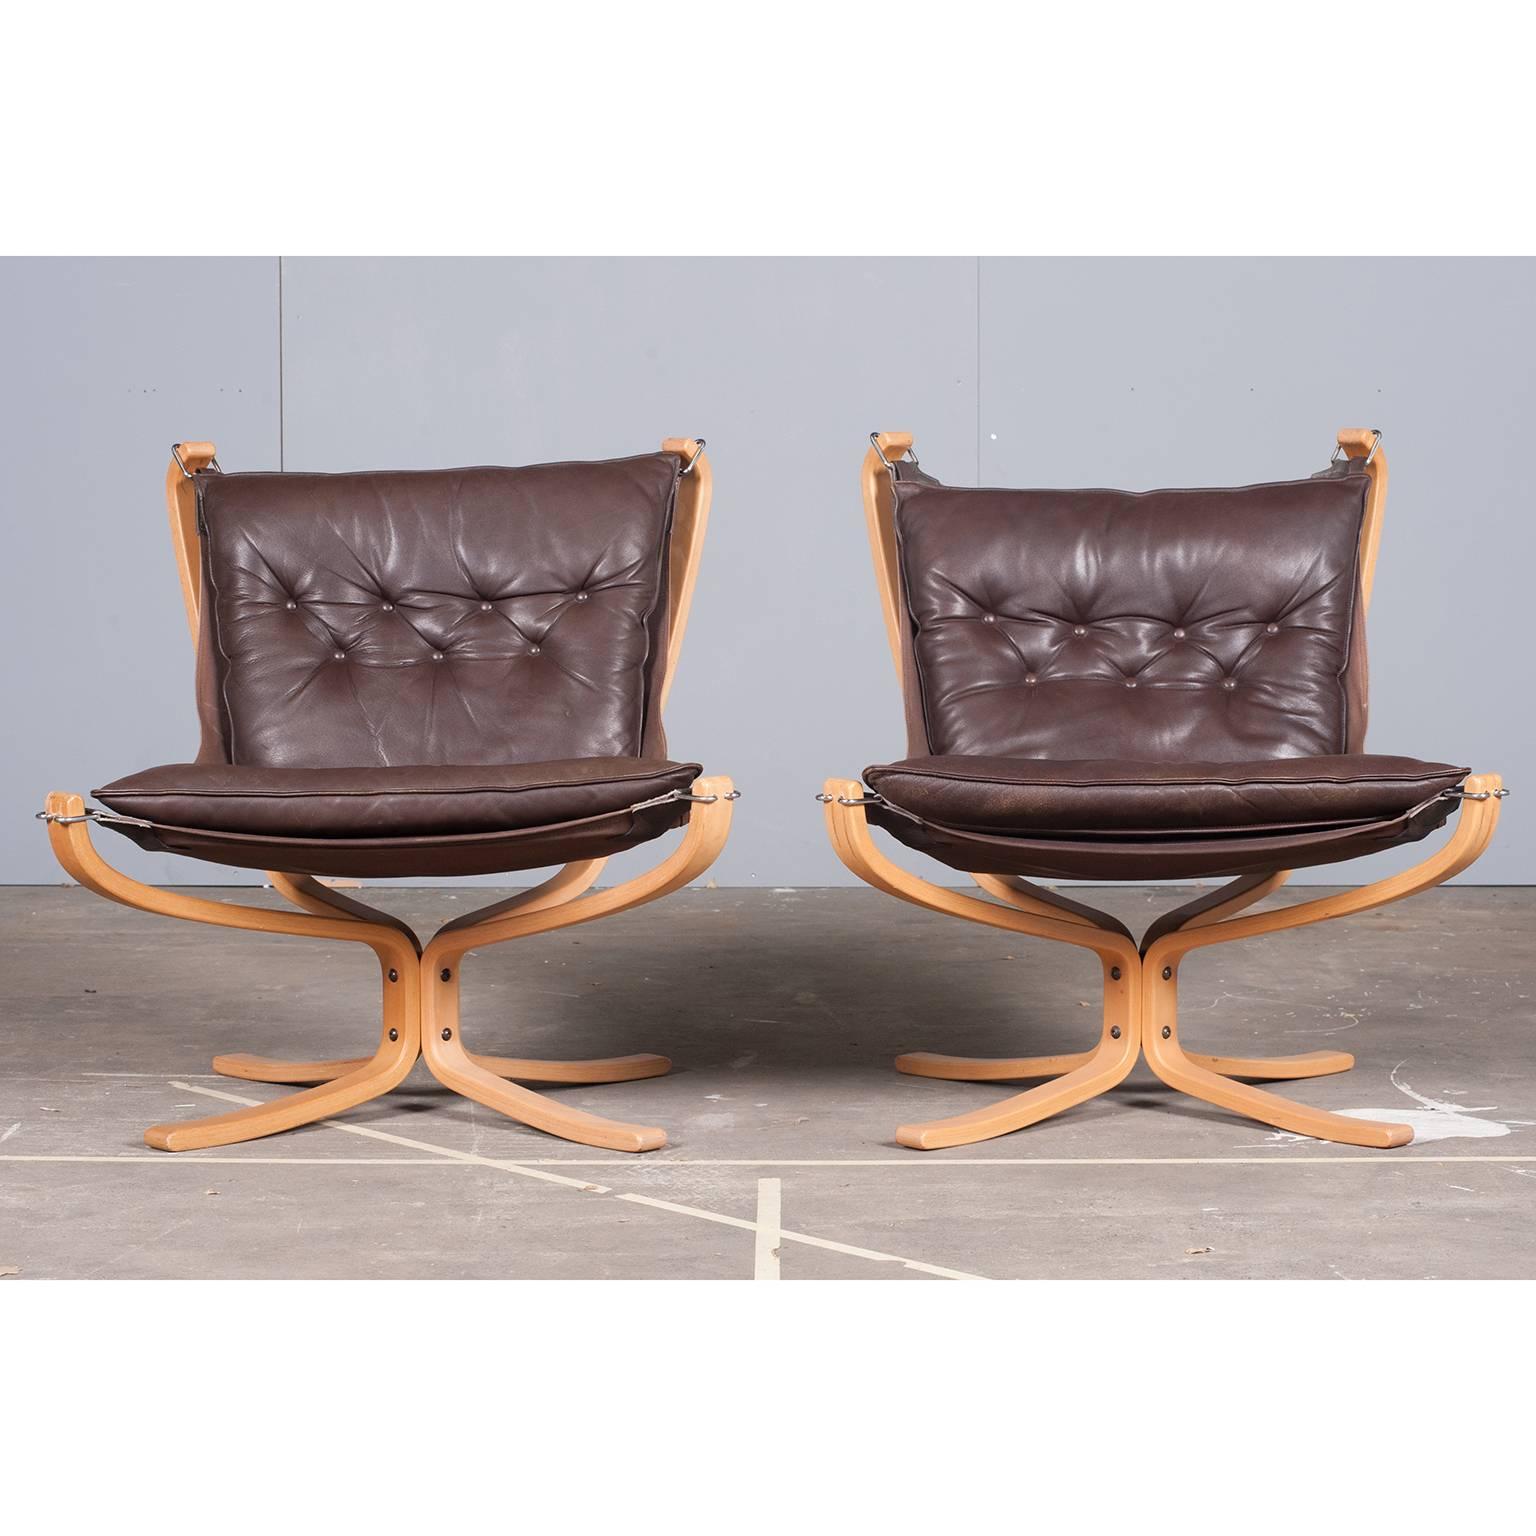 Late 20th Century Norwegian Falcon Chair in Chocolate Brown Leather by Sigurd Ressel, 1971 For Sale